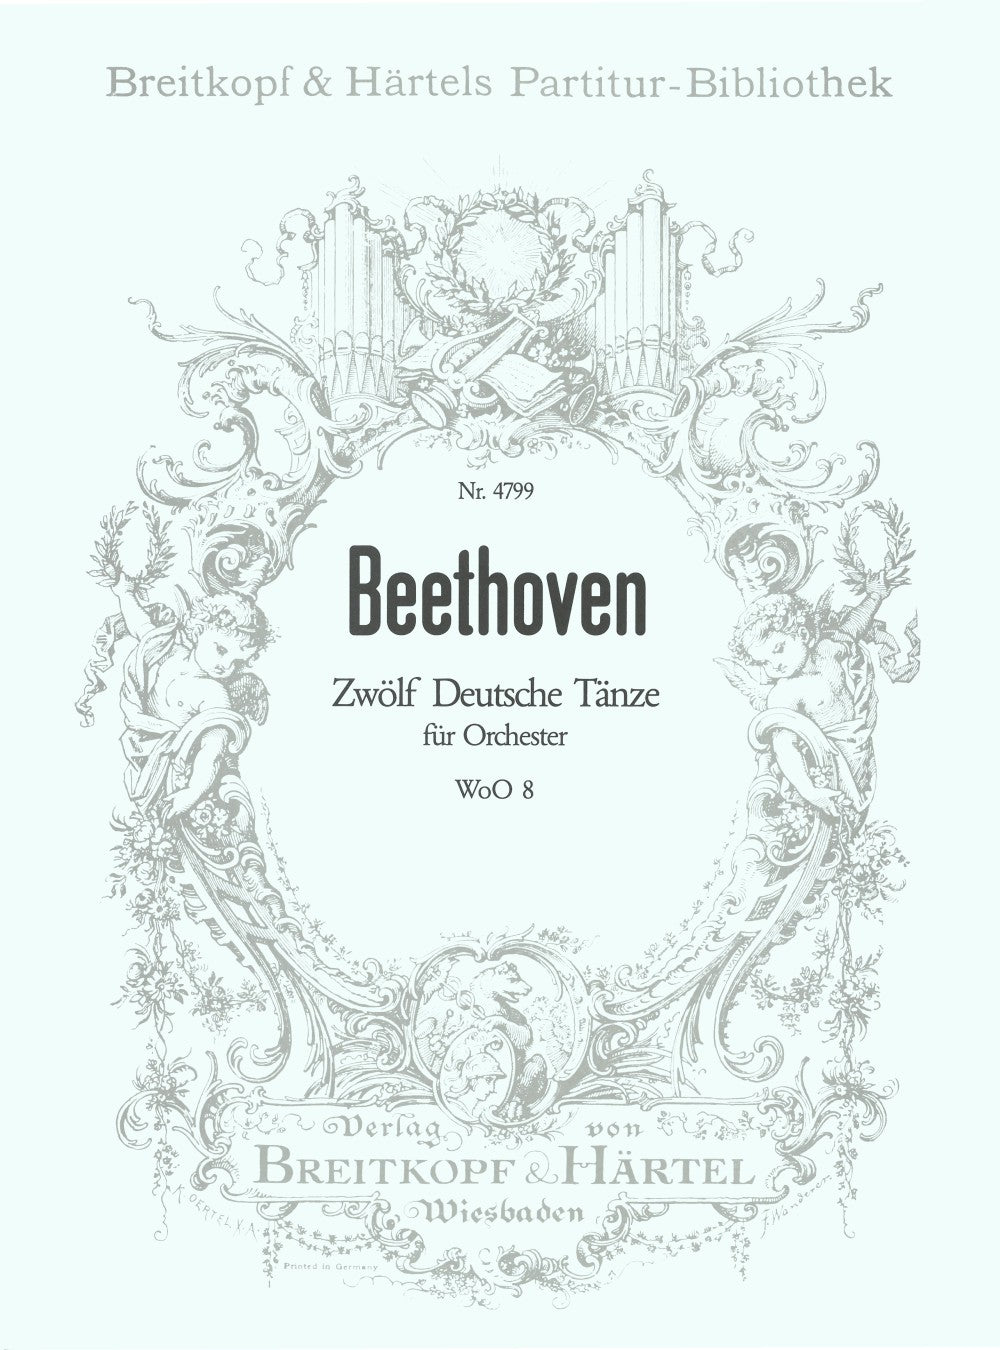 Beethoven: 12 German Dances for Orchestra, WoO 8